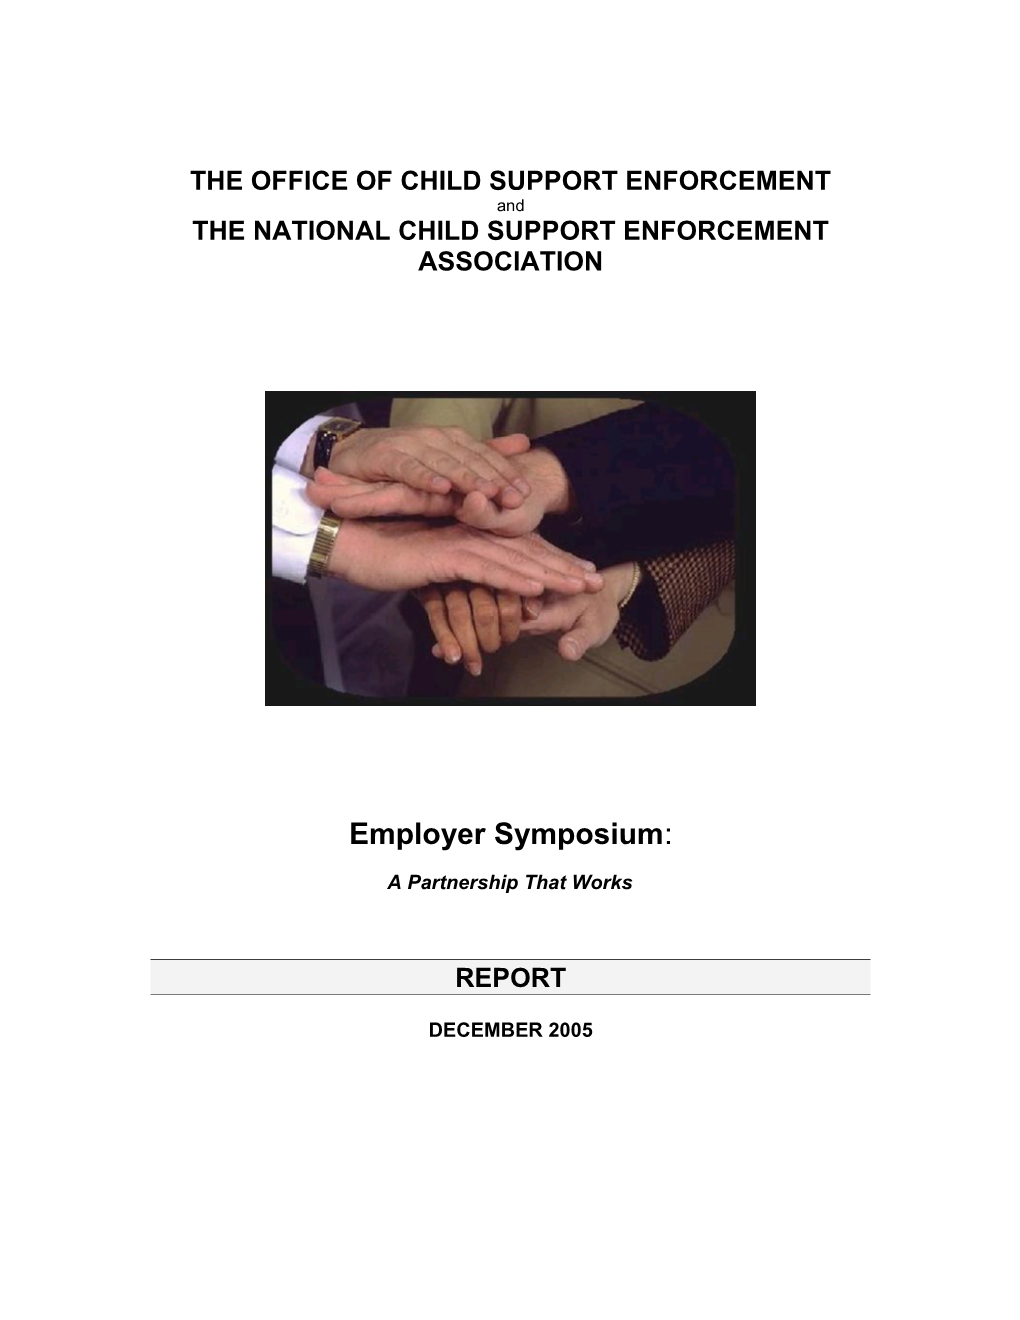 The Office of Child Support Enforcement